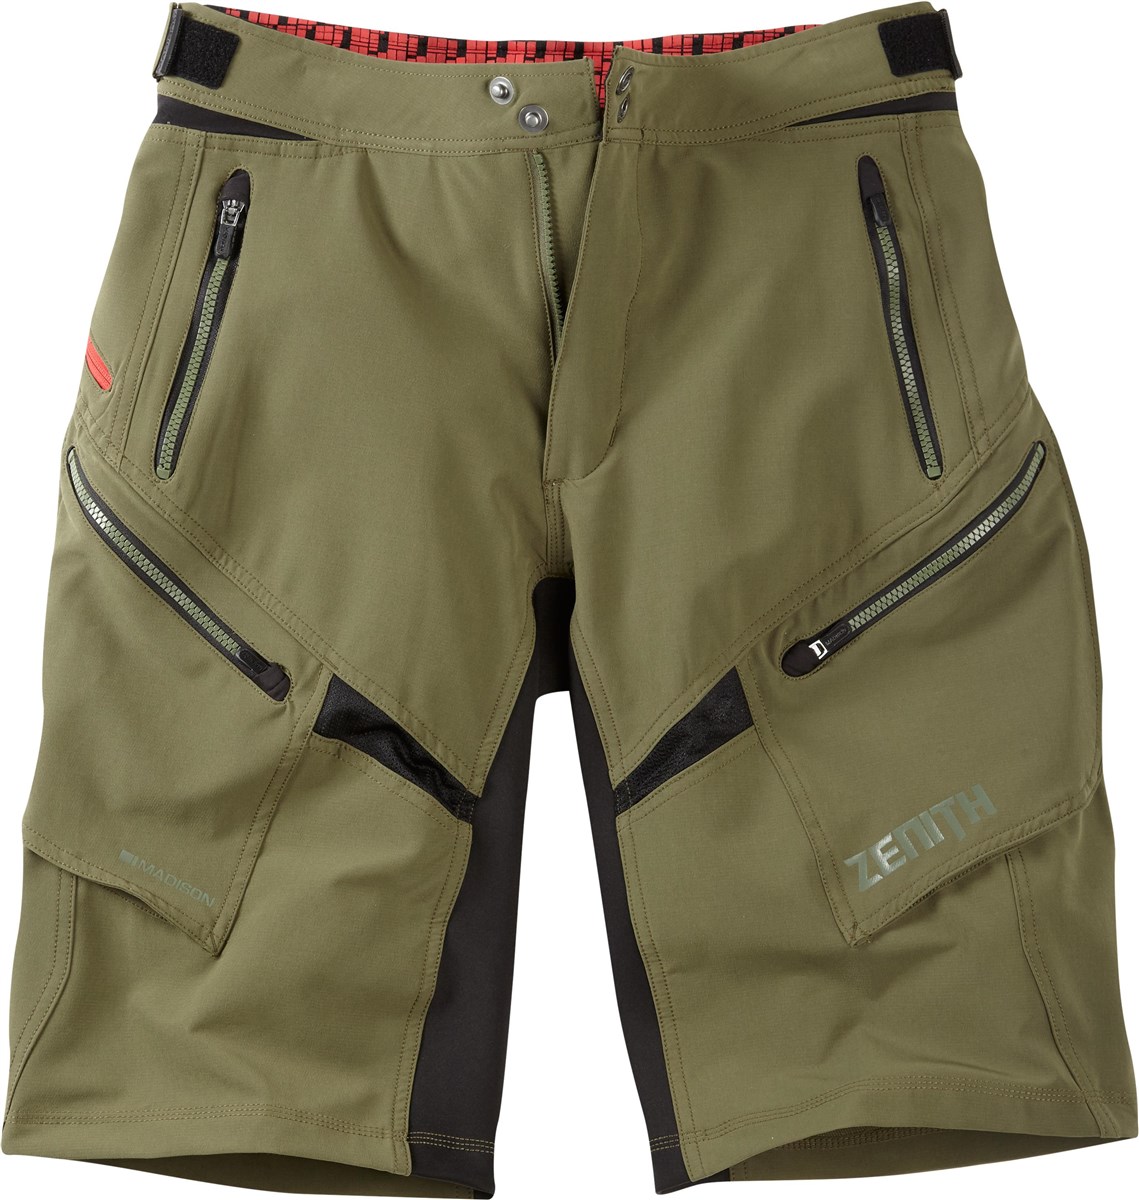 Madison Zenith Baggy Cycling Shorts